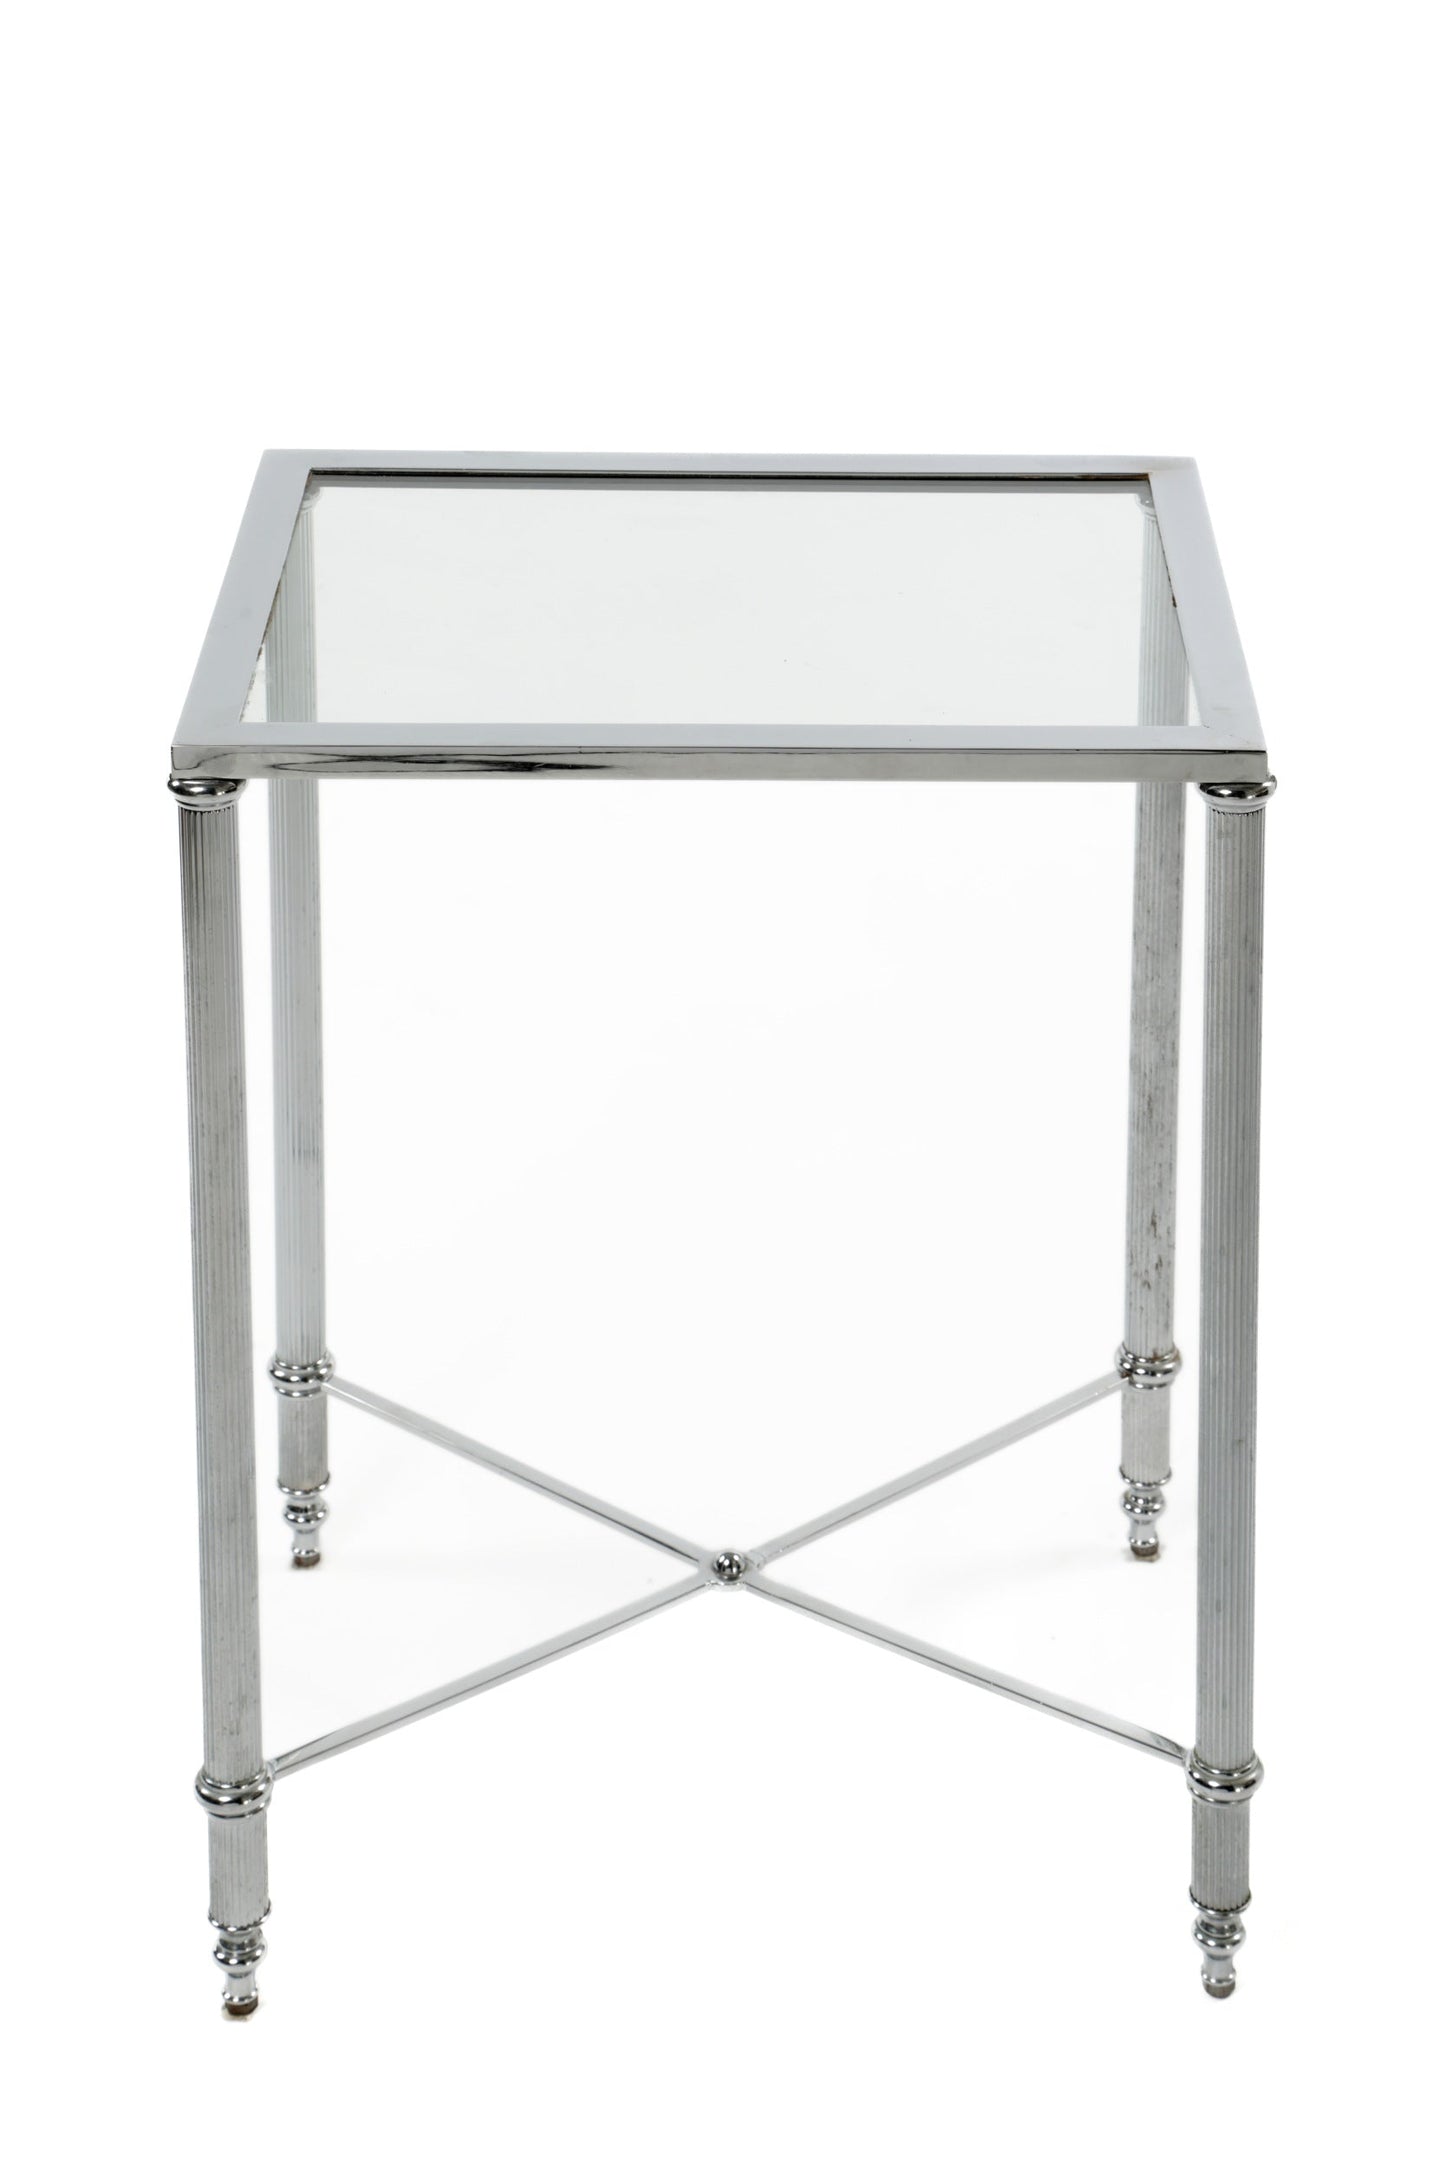 Pair of chromed glass top high tables